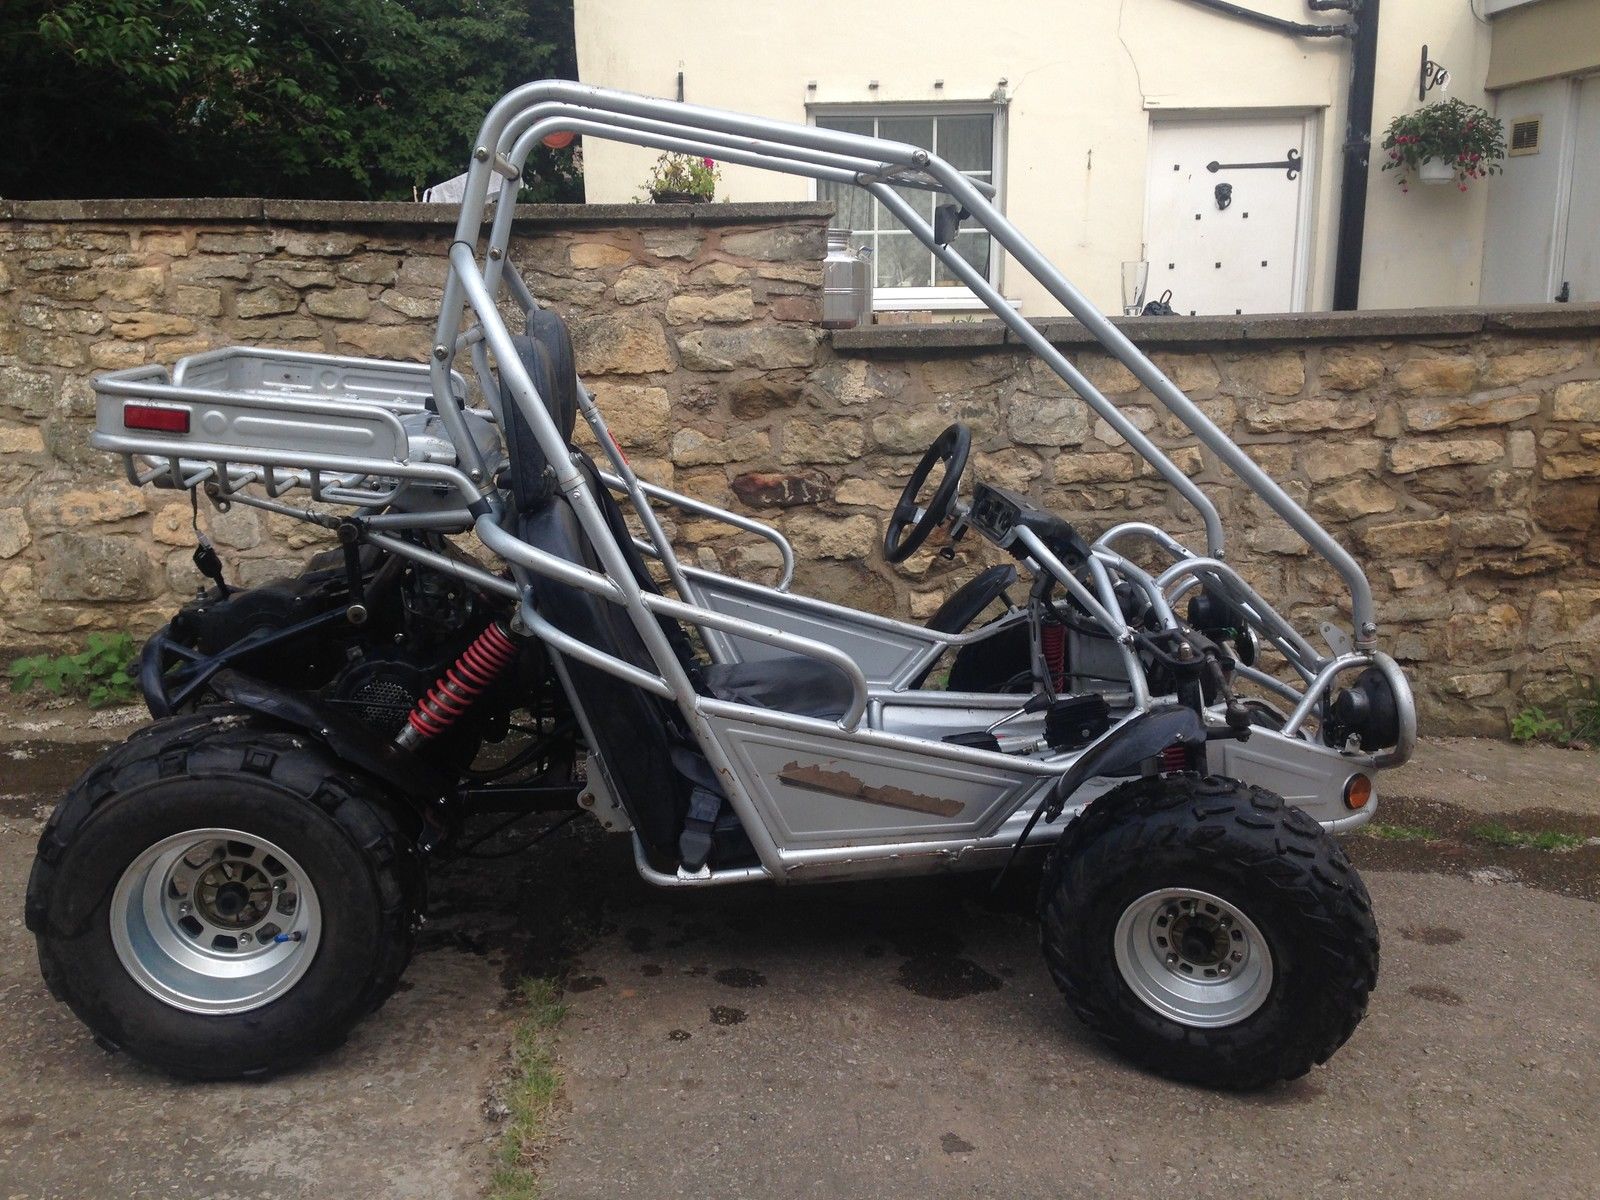 150cc off road buggy